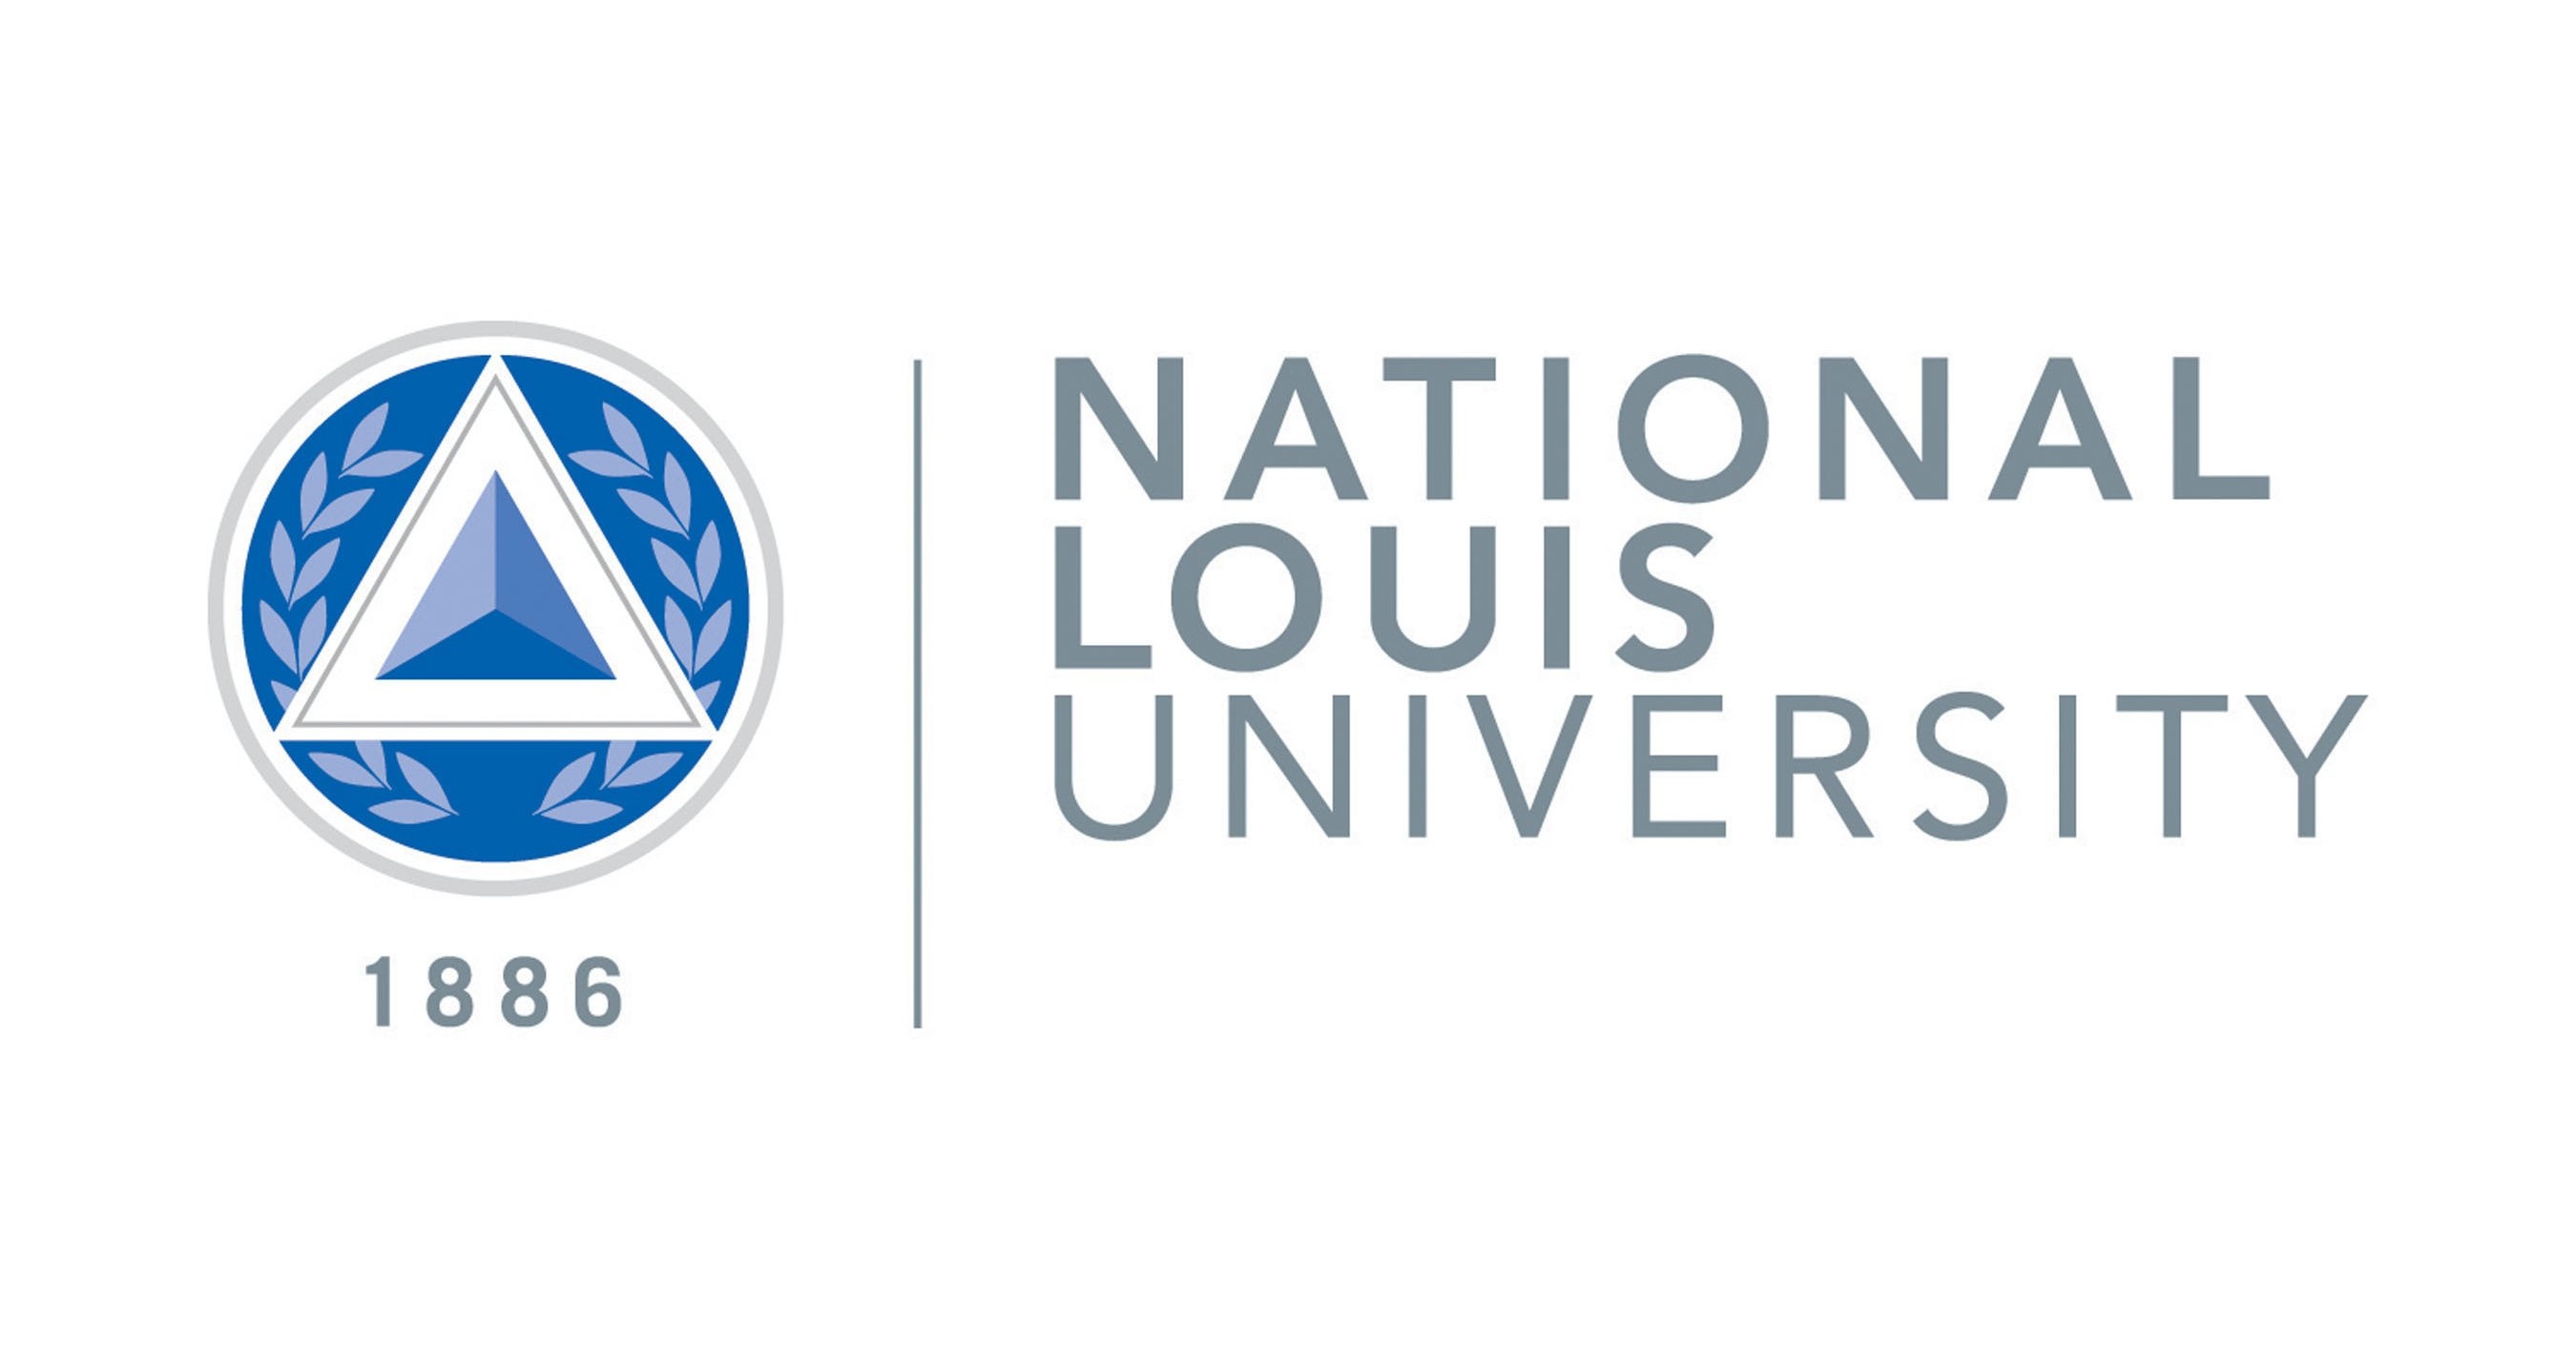 With Necessary Regulatory Approvals, National Louis University